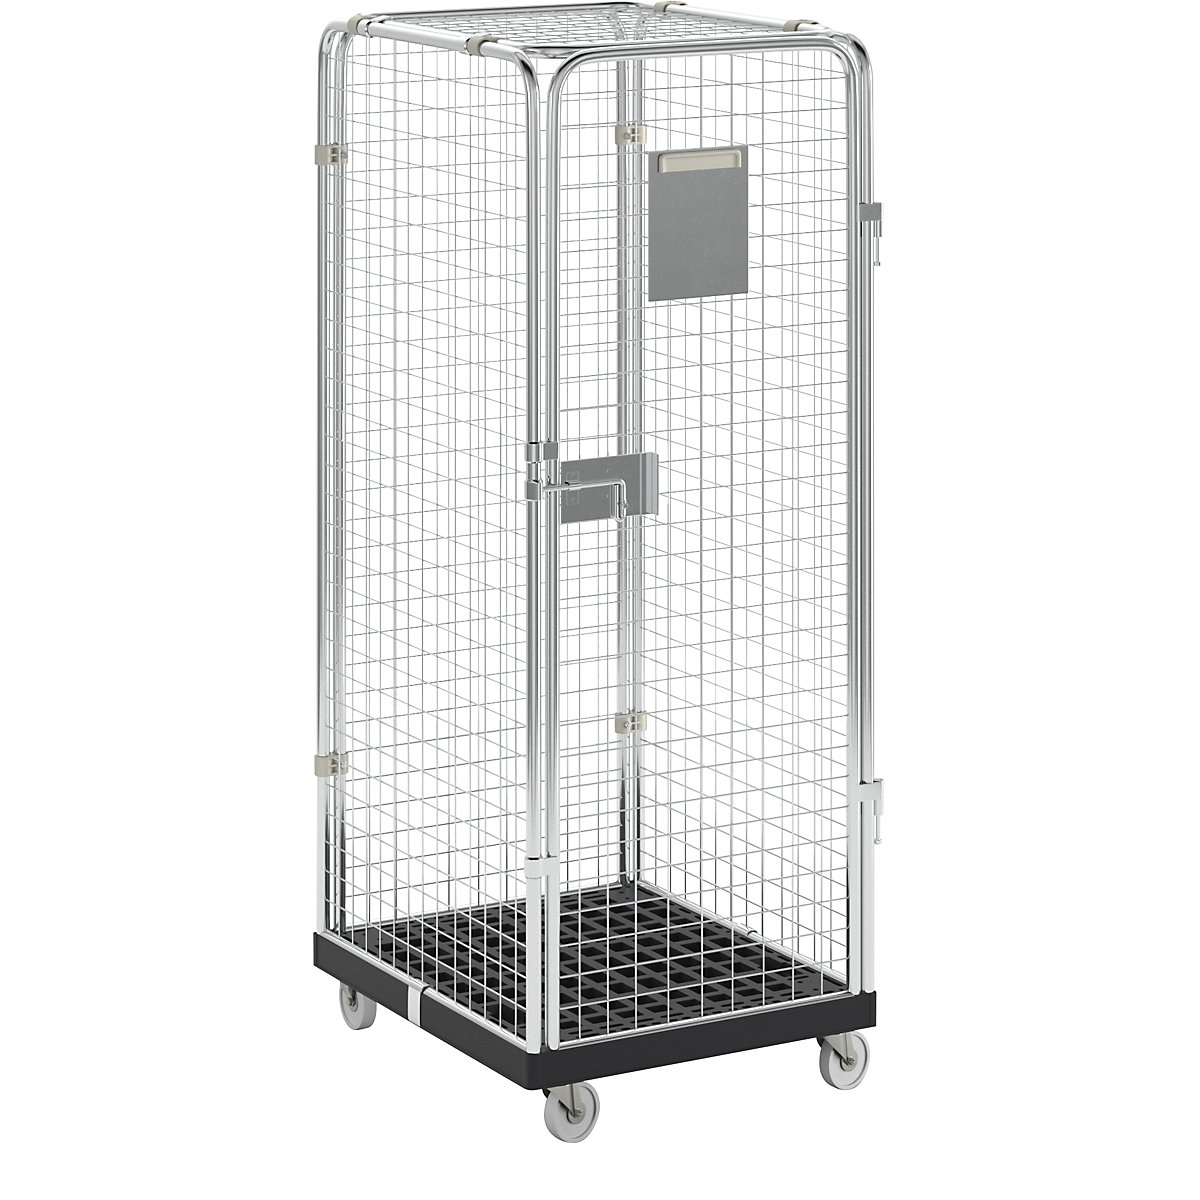 Roll container with mesh panels – eurokraft basic